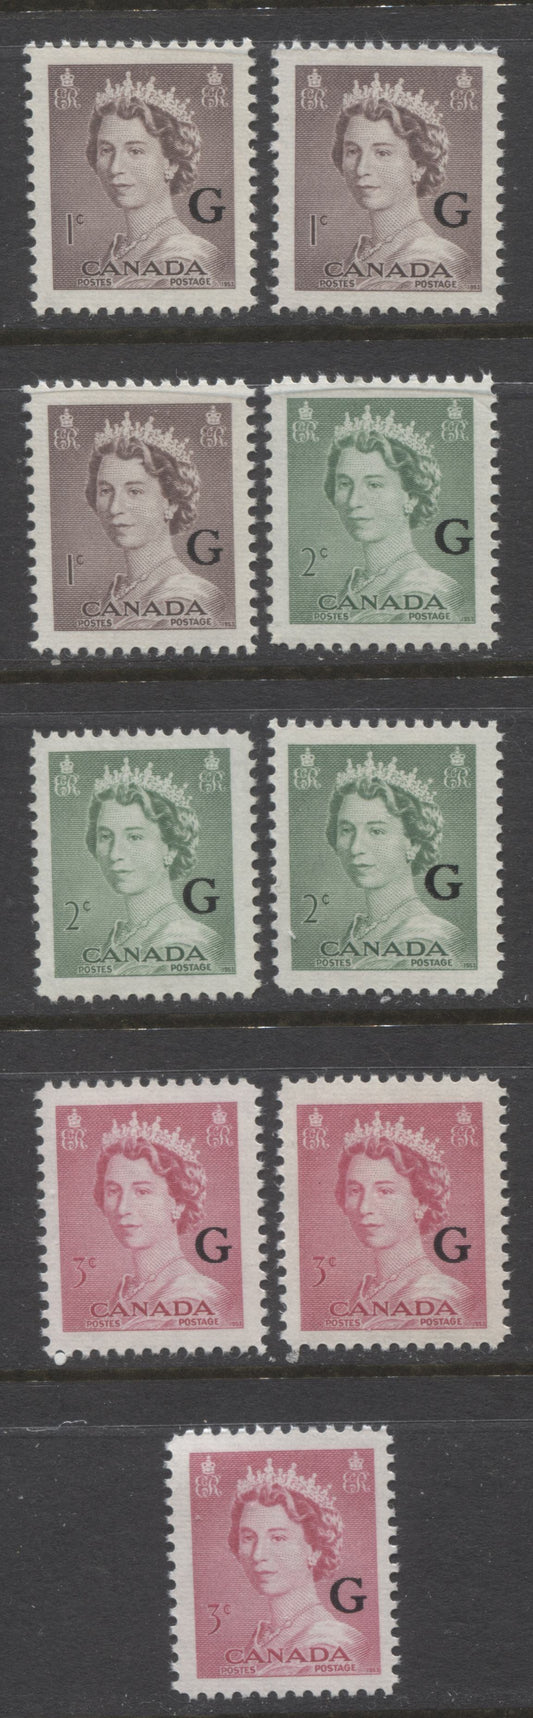 Lot 240 Canada #O33-O35 1c-3c Violet Brown, Pale Green, & Cerise Queen Elizabeth II, 1953-1954 Karsh Issue, 9 VFNH Singles, Different Perfs